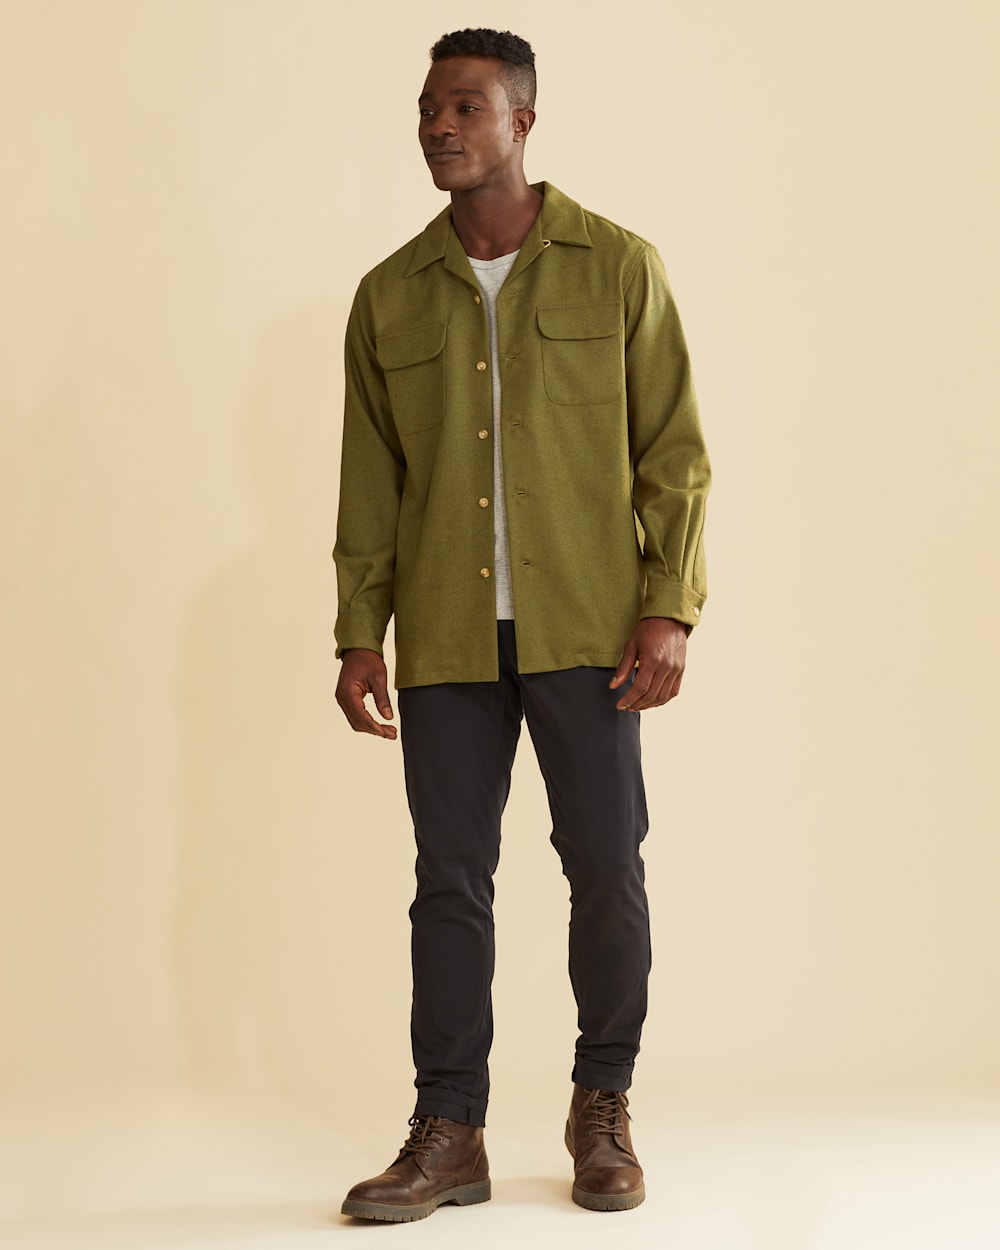 ALTERNATE VIEW OF MEN'S BOARD SHIRT IN OLIVE GREEN image number 6